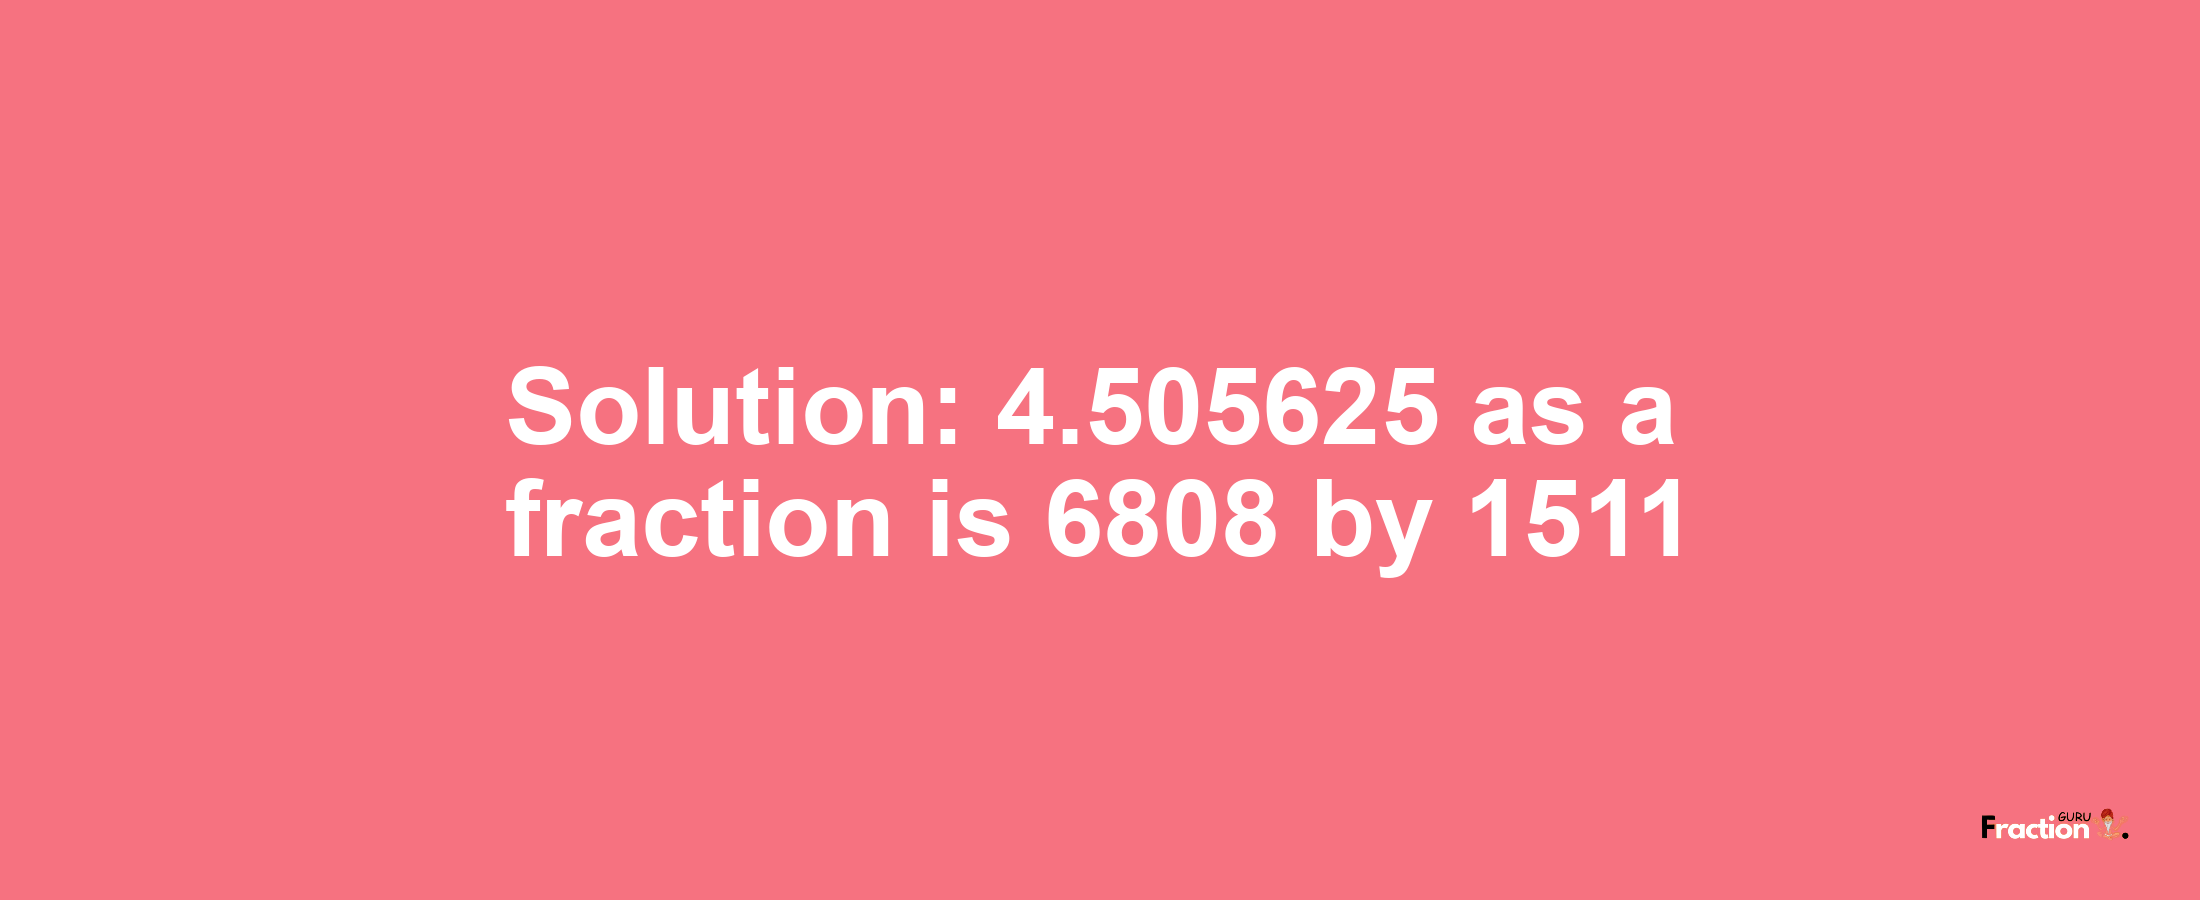 Solution:4.505625 as a fraction is 6808/1511